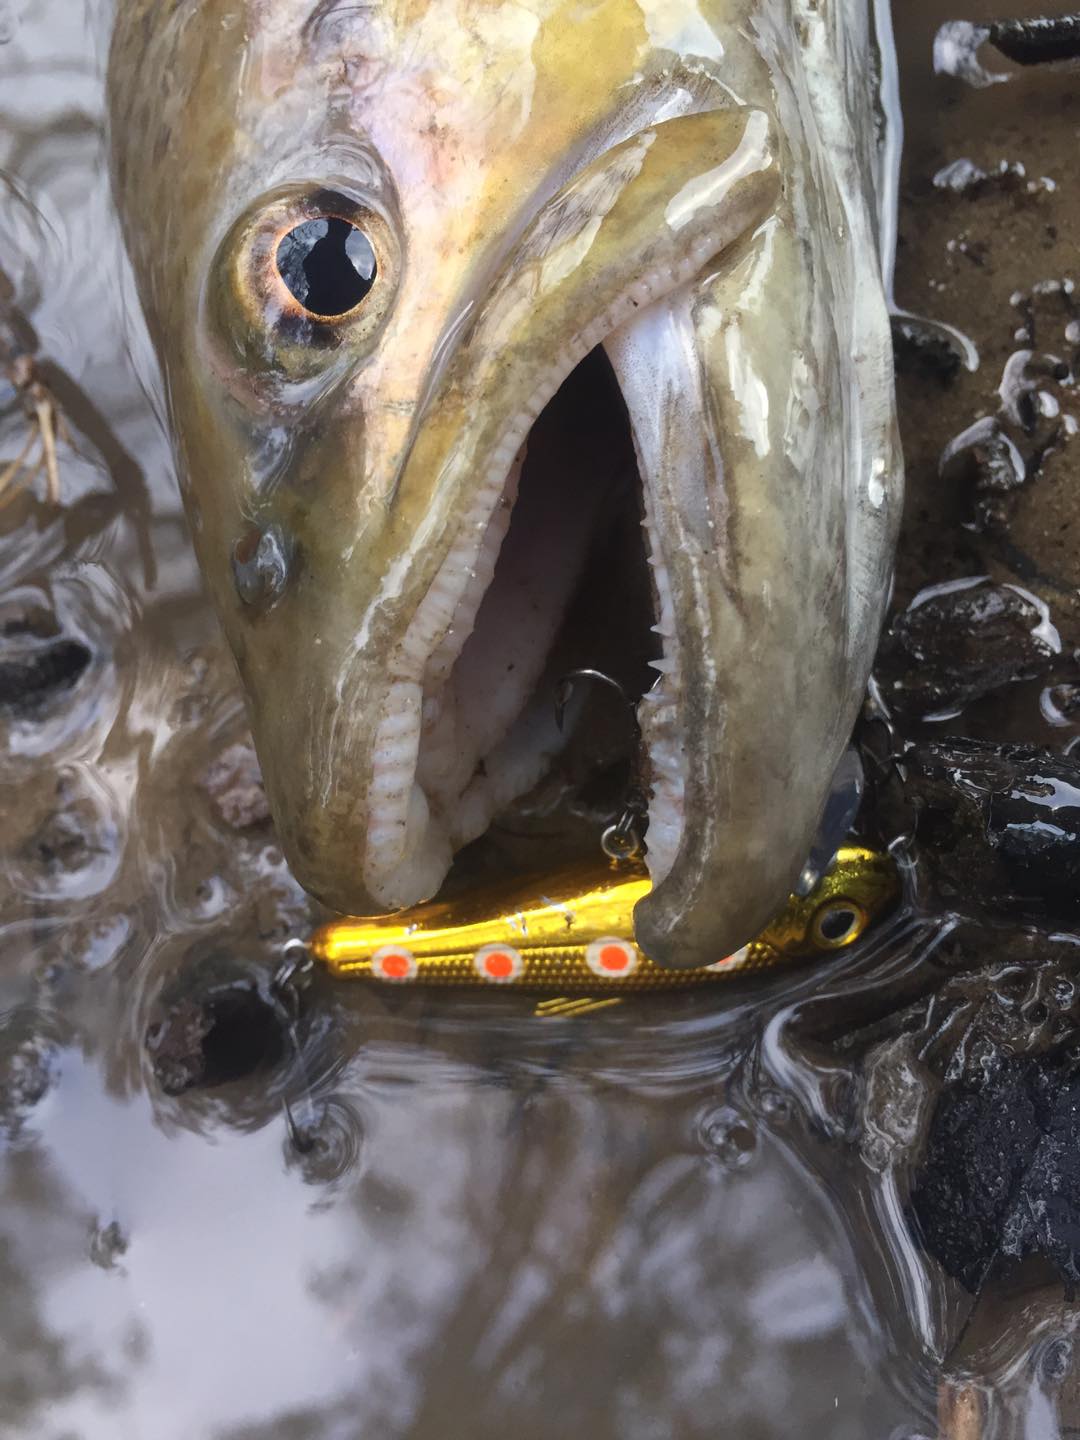 Bullet Lures Five-O Minnow Sinking (Spawning Brown Trout)